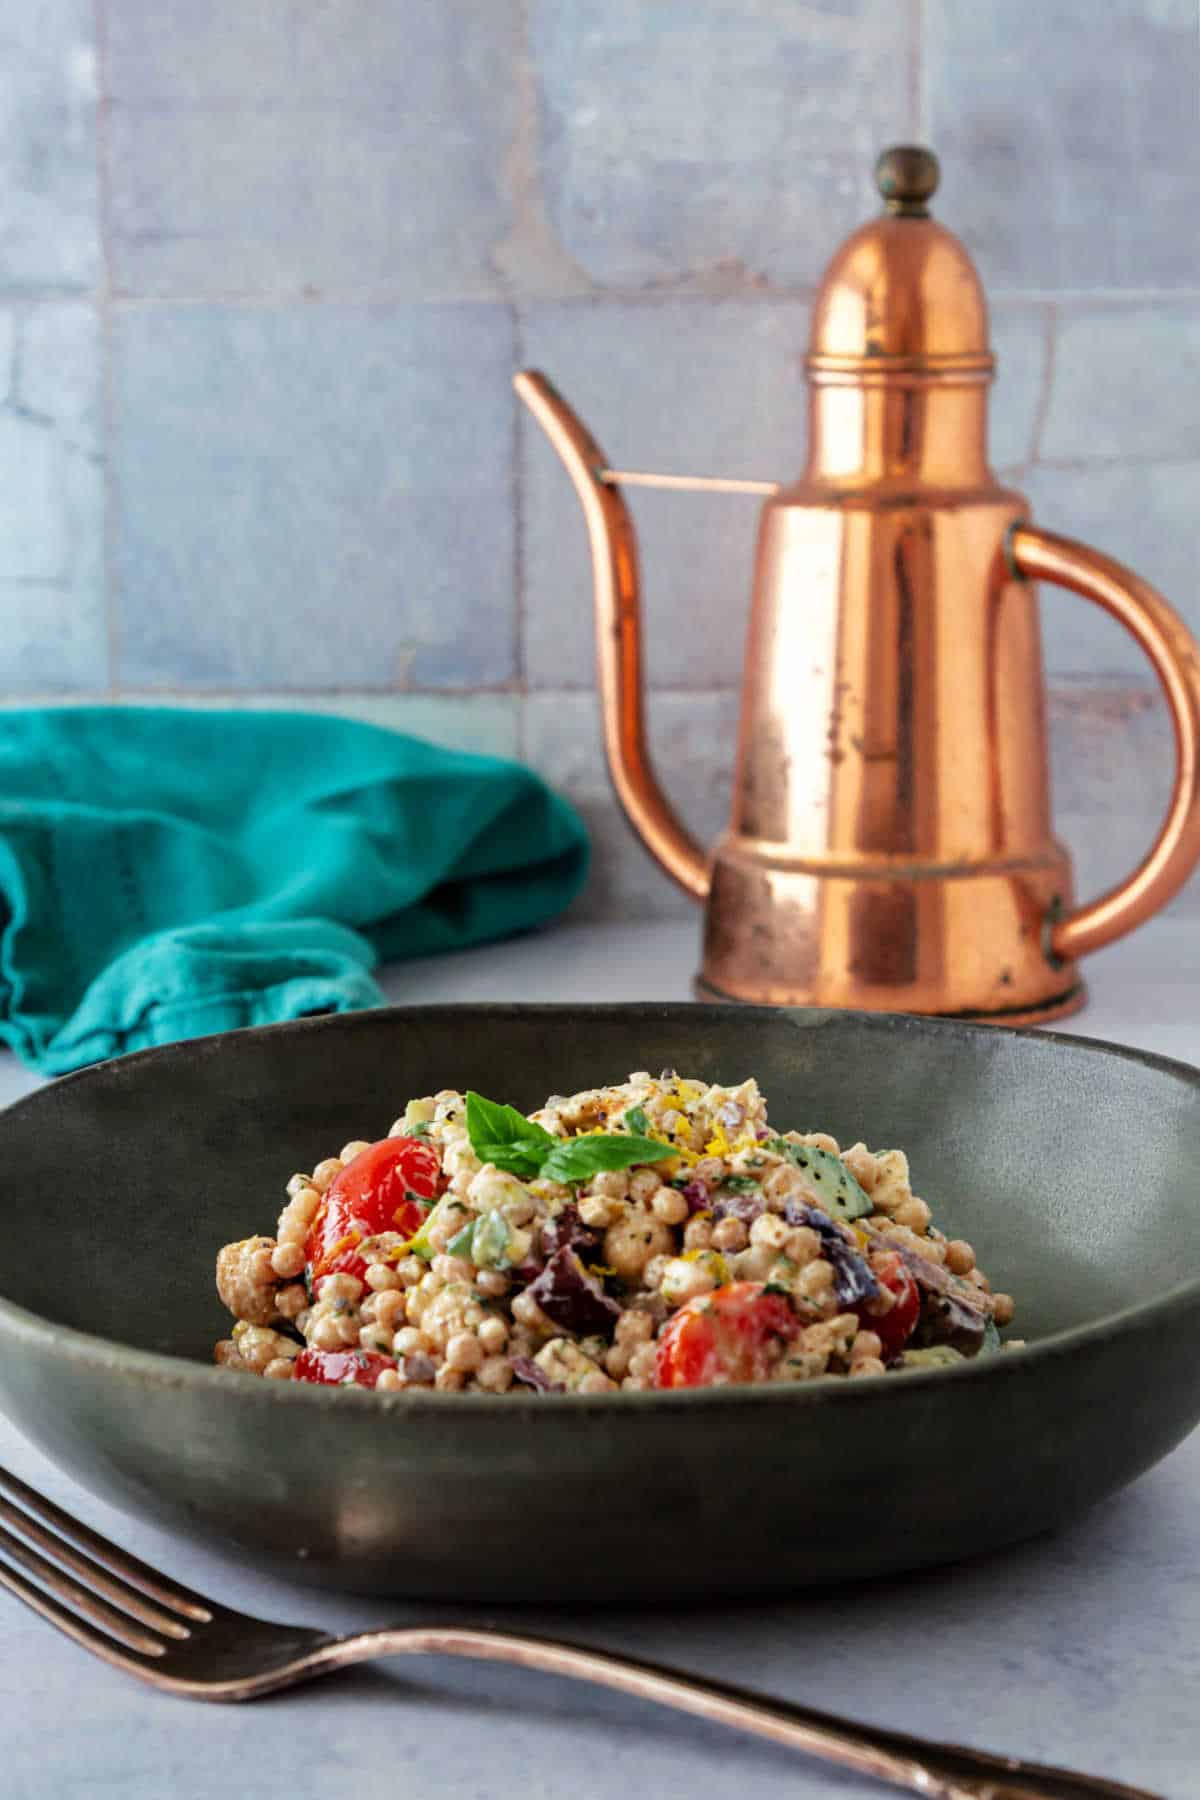 A dark gray bowl of pearl couscous salad on a gray surface with a gray tile backdrop and a copper oil cruet in the background.